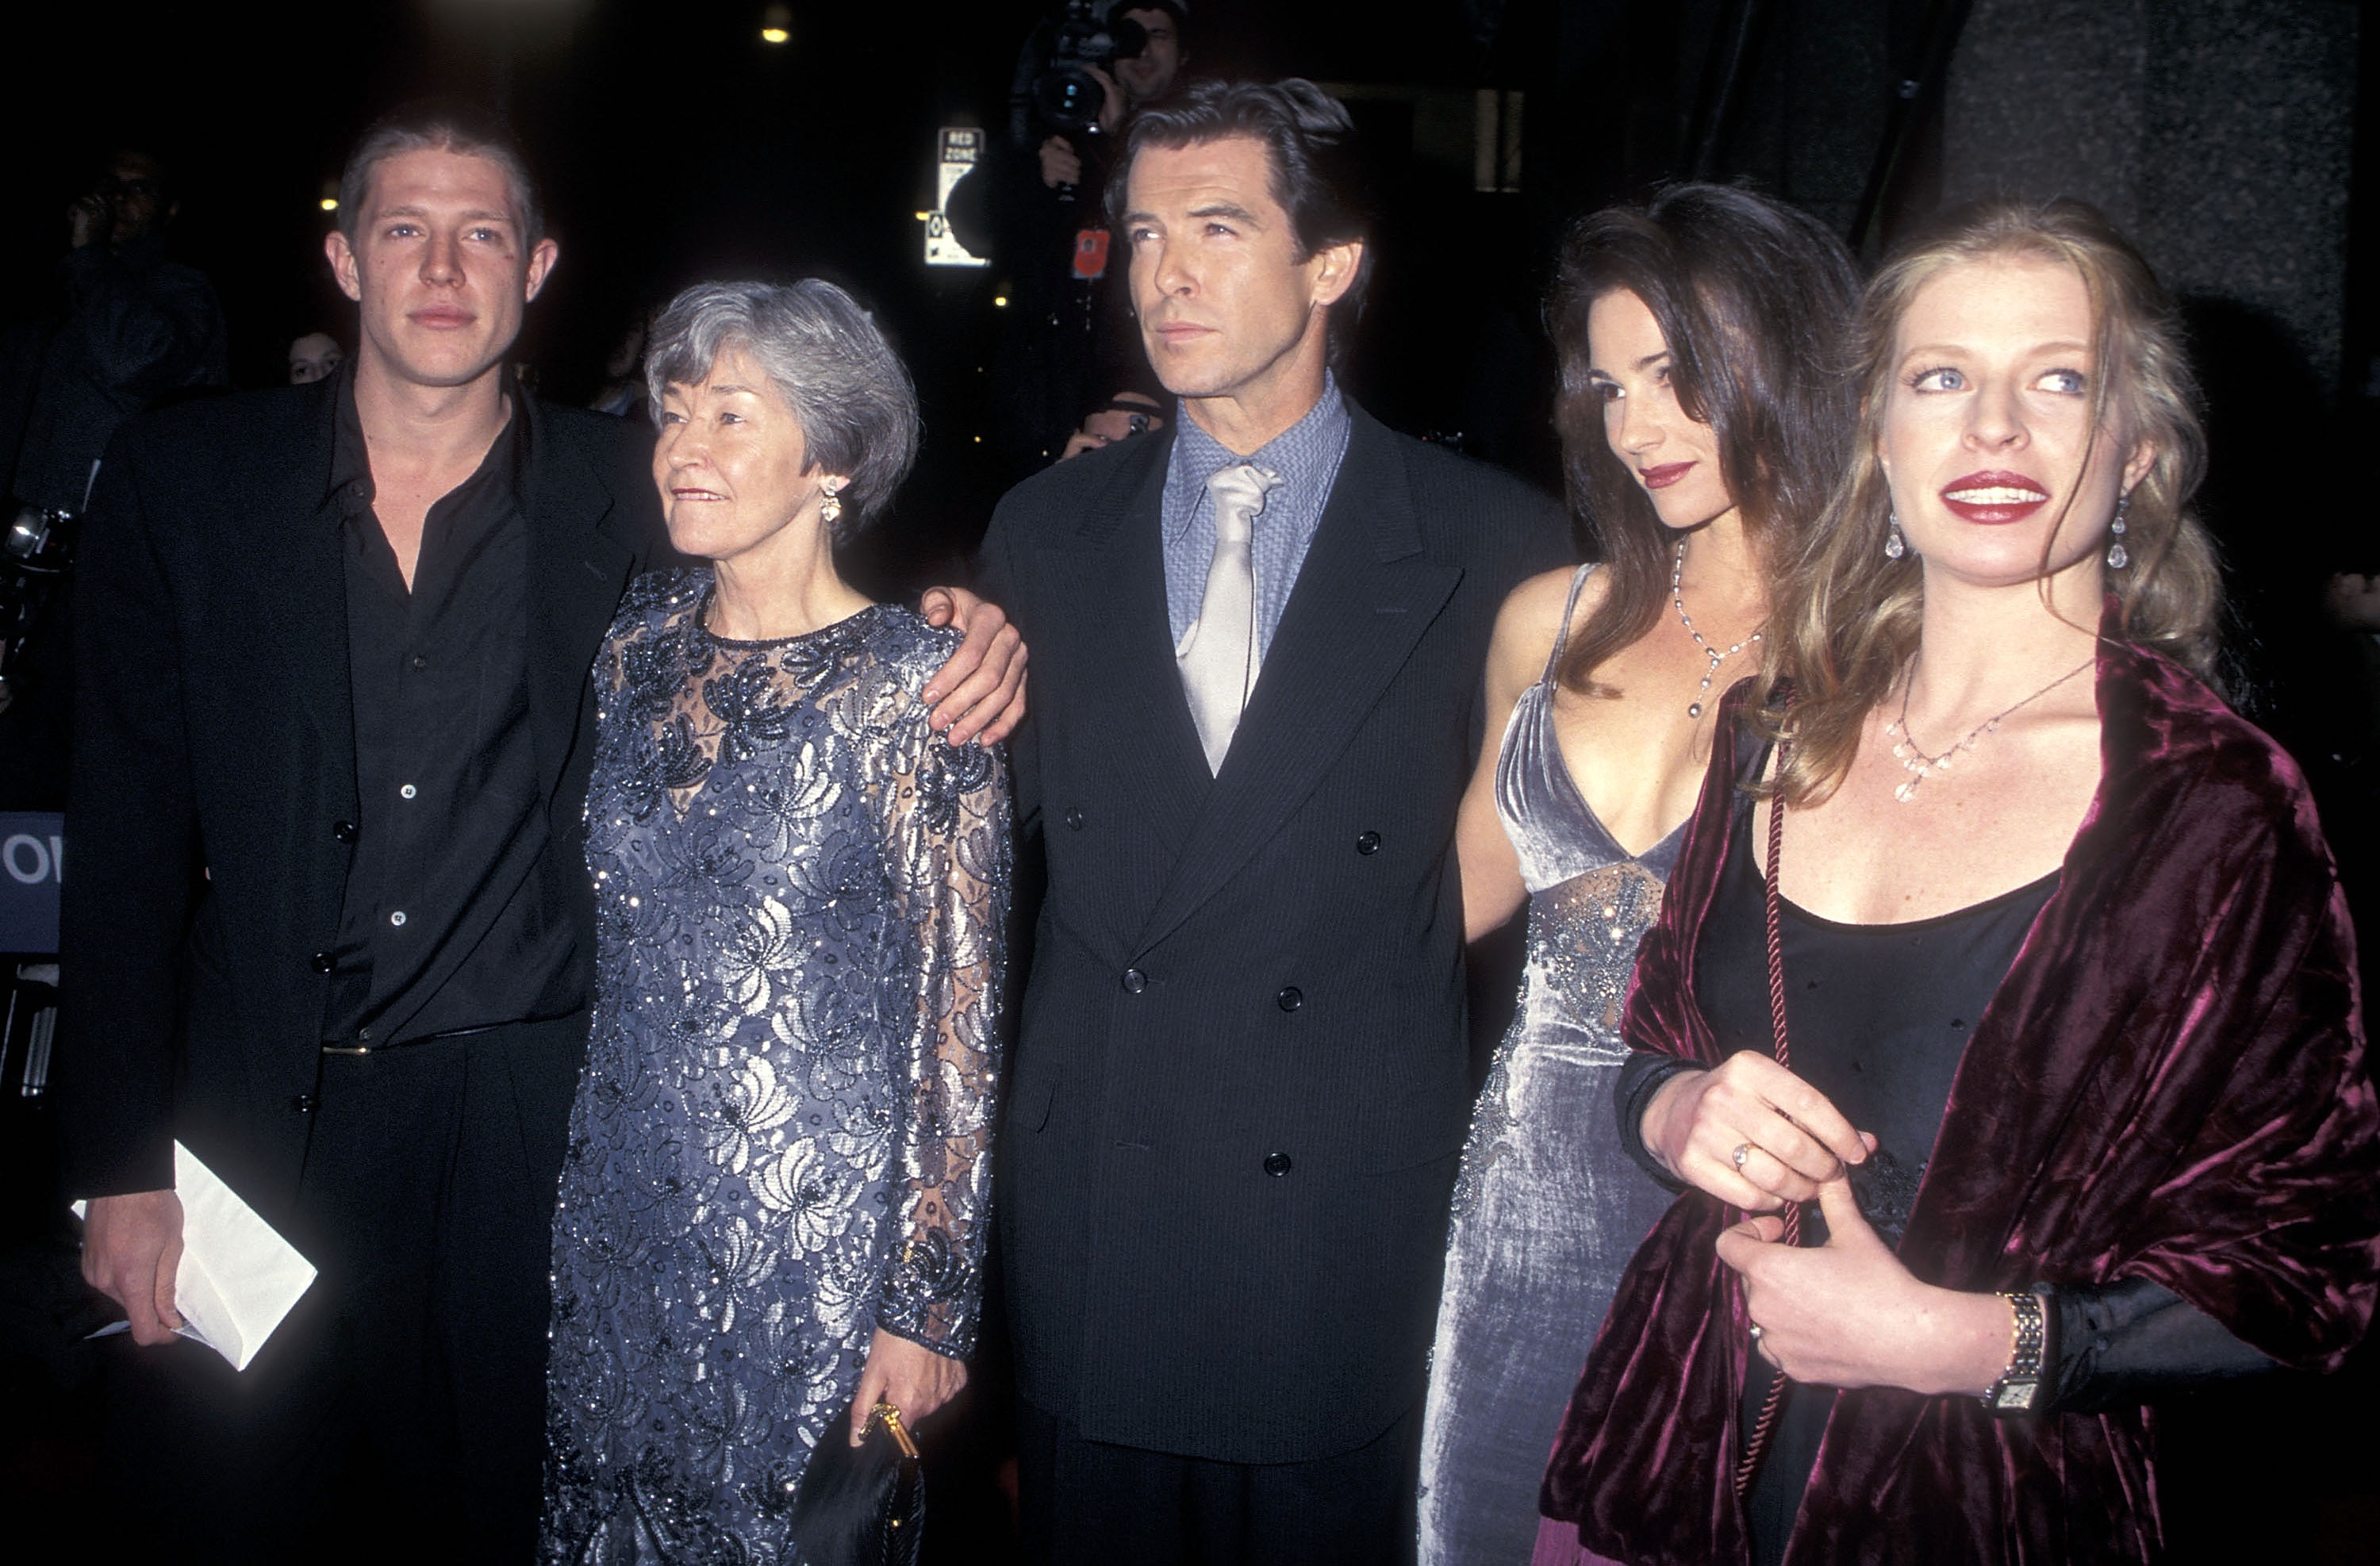 Pierce Brosnan, girlfriend Keely Shaye Smith, his son Christopher Brosnan, his daughter Charlotte Brosnan and his mother May Smith attend the "Goldeneye" New York City Premiere Party on November 13, 1995 at Radio City Music Hall in New York City. | Source: Getty Images